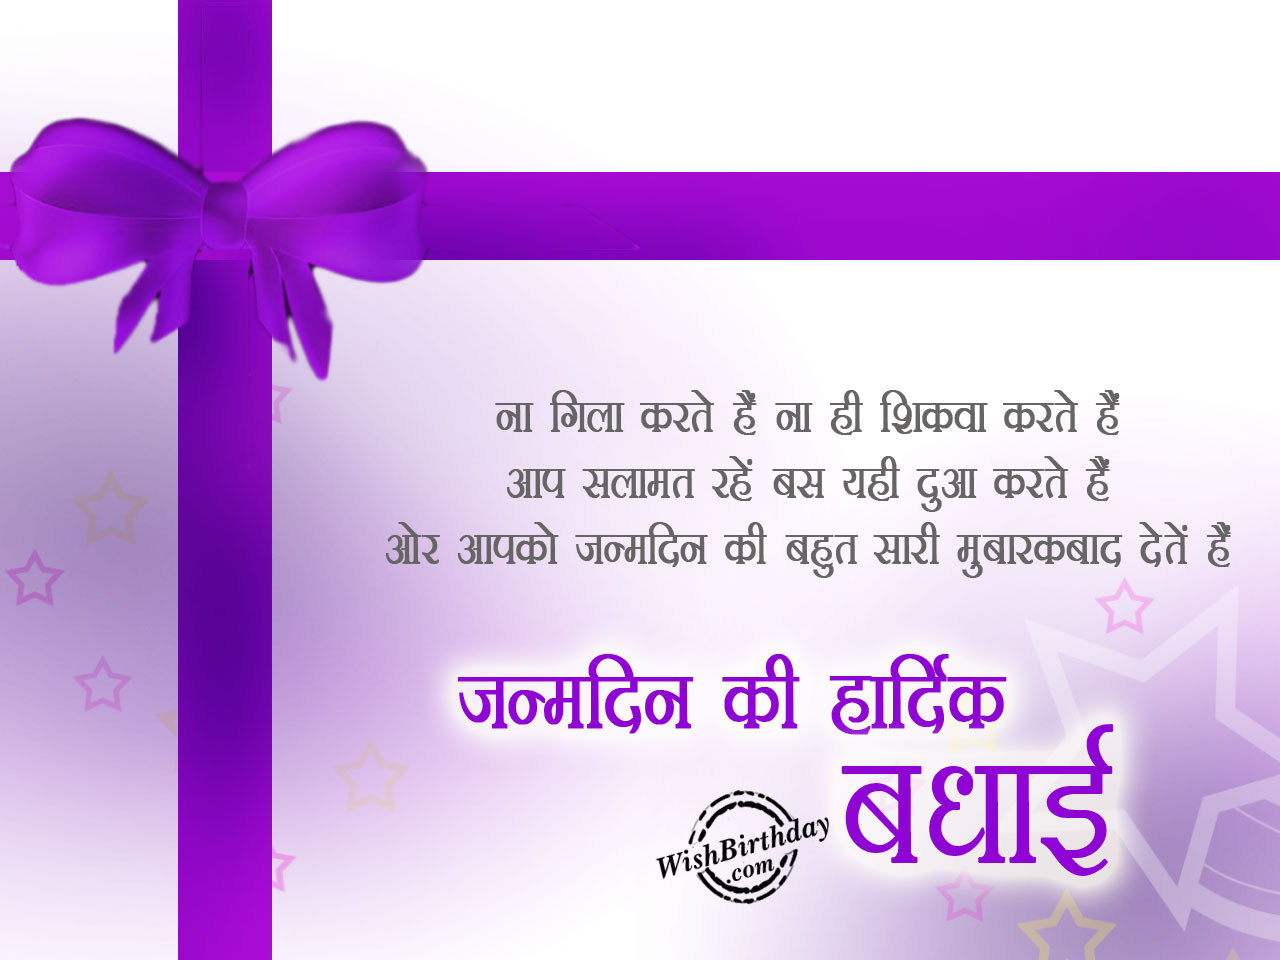 Birthday Wishes In Hindi - Birthday Images, Pictures